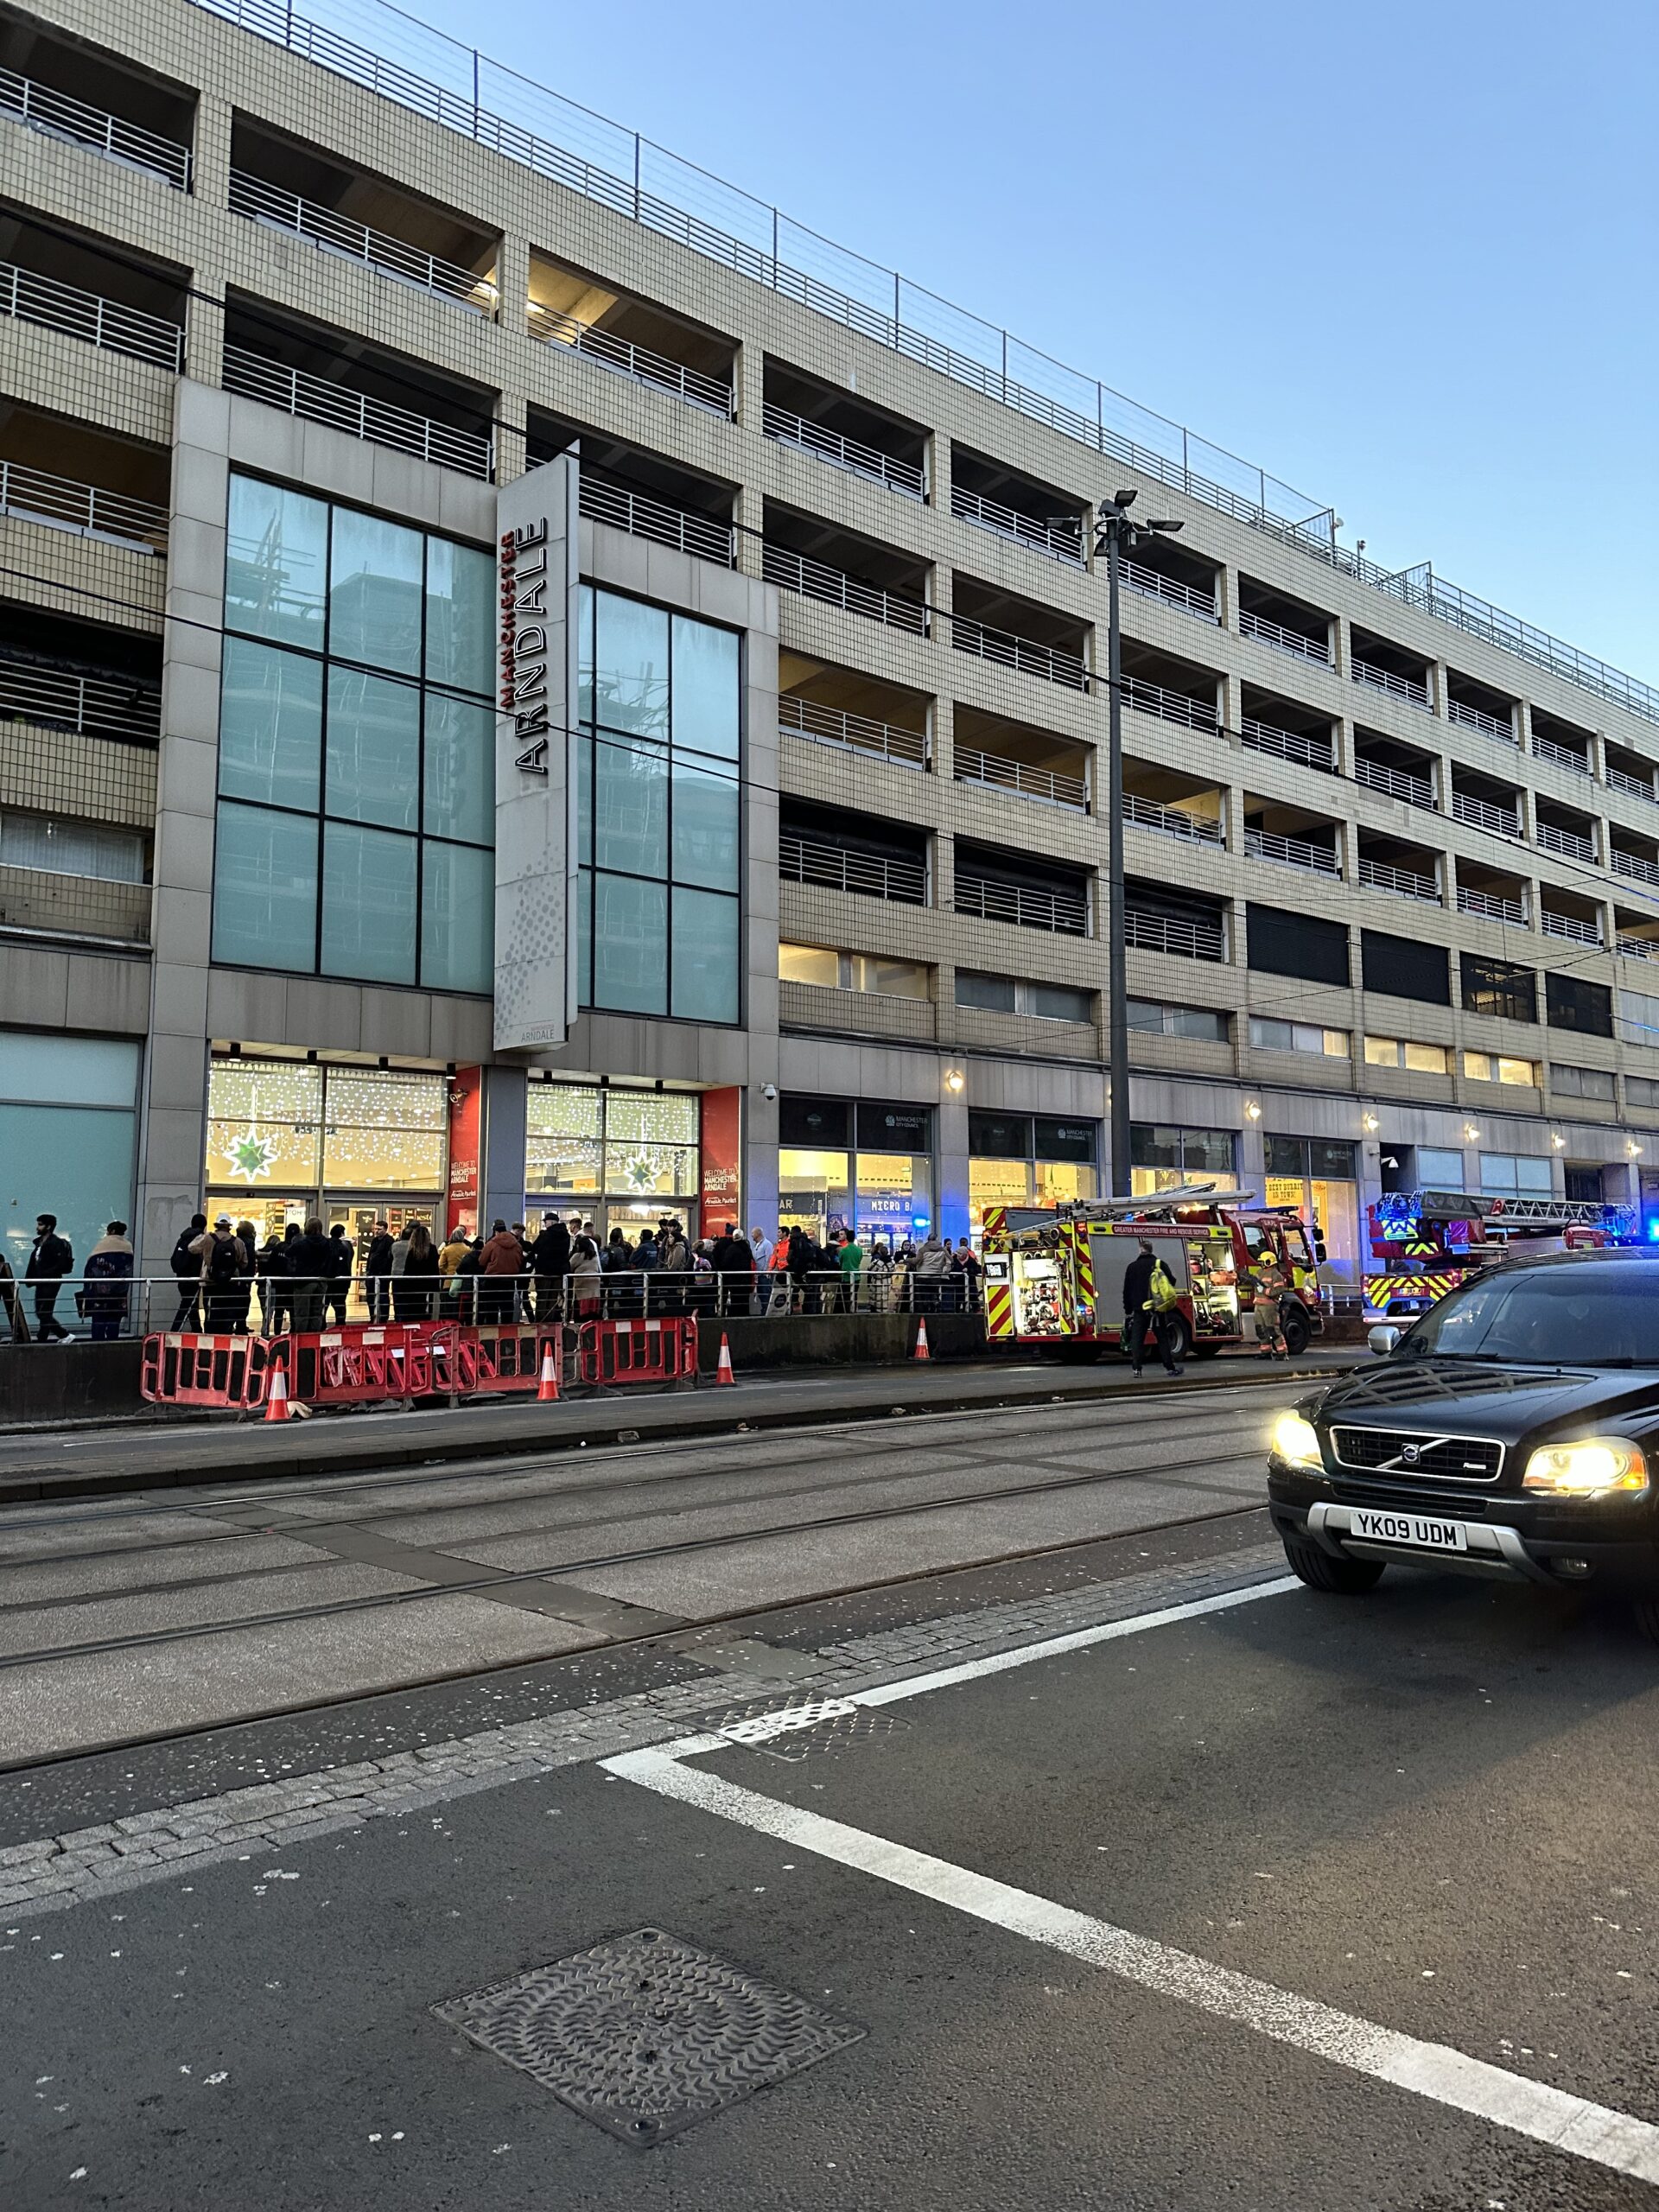 Shoppers evacuated from the Arndale Market in Manchester after a fire set off the sprinkler system